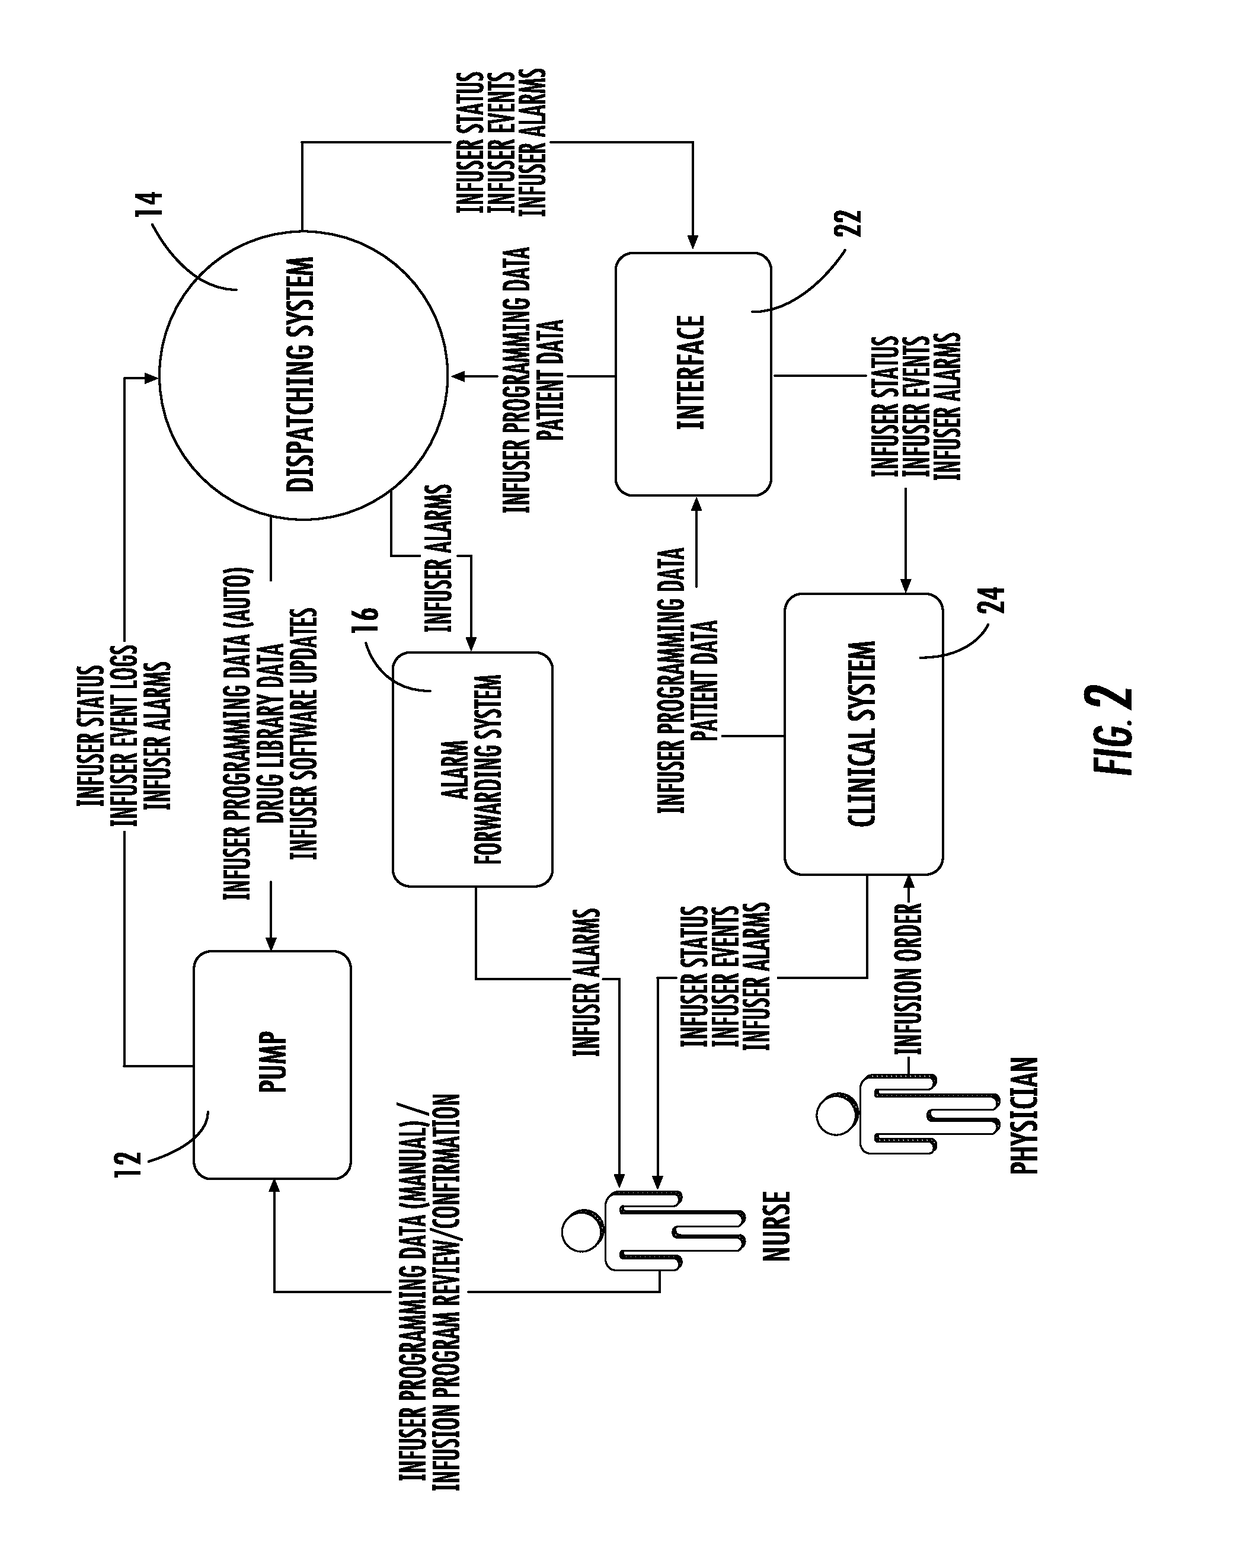 Patient care system with conditional alarm forwarding